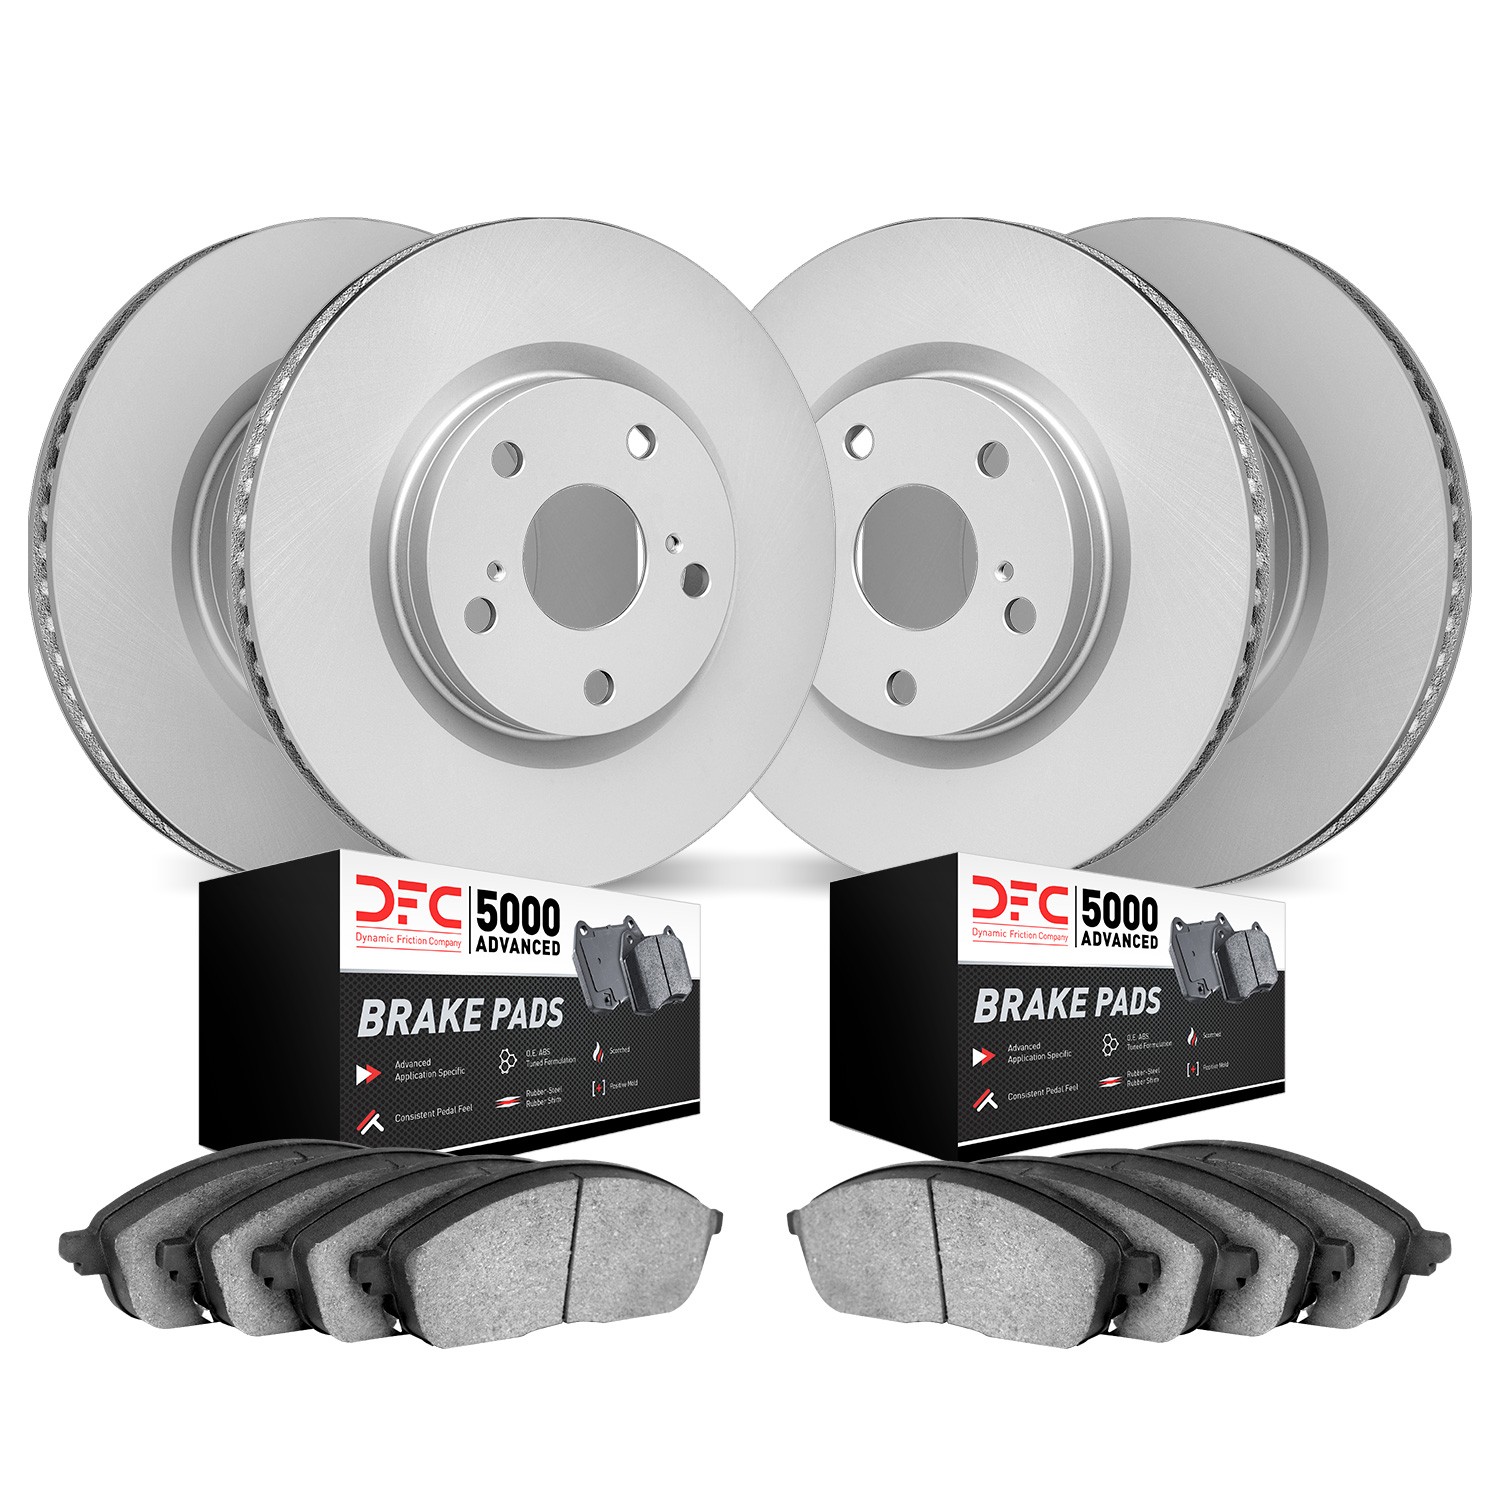 4504-75022 Geospec Brake Rotors w/5000 Advanced Brake Pads Kit, Fits Select Lexus/Toyota/Scion, Position: Front and Rear